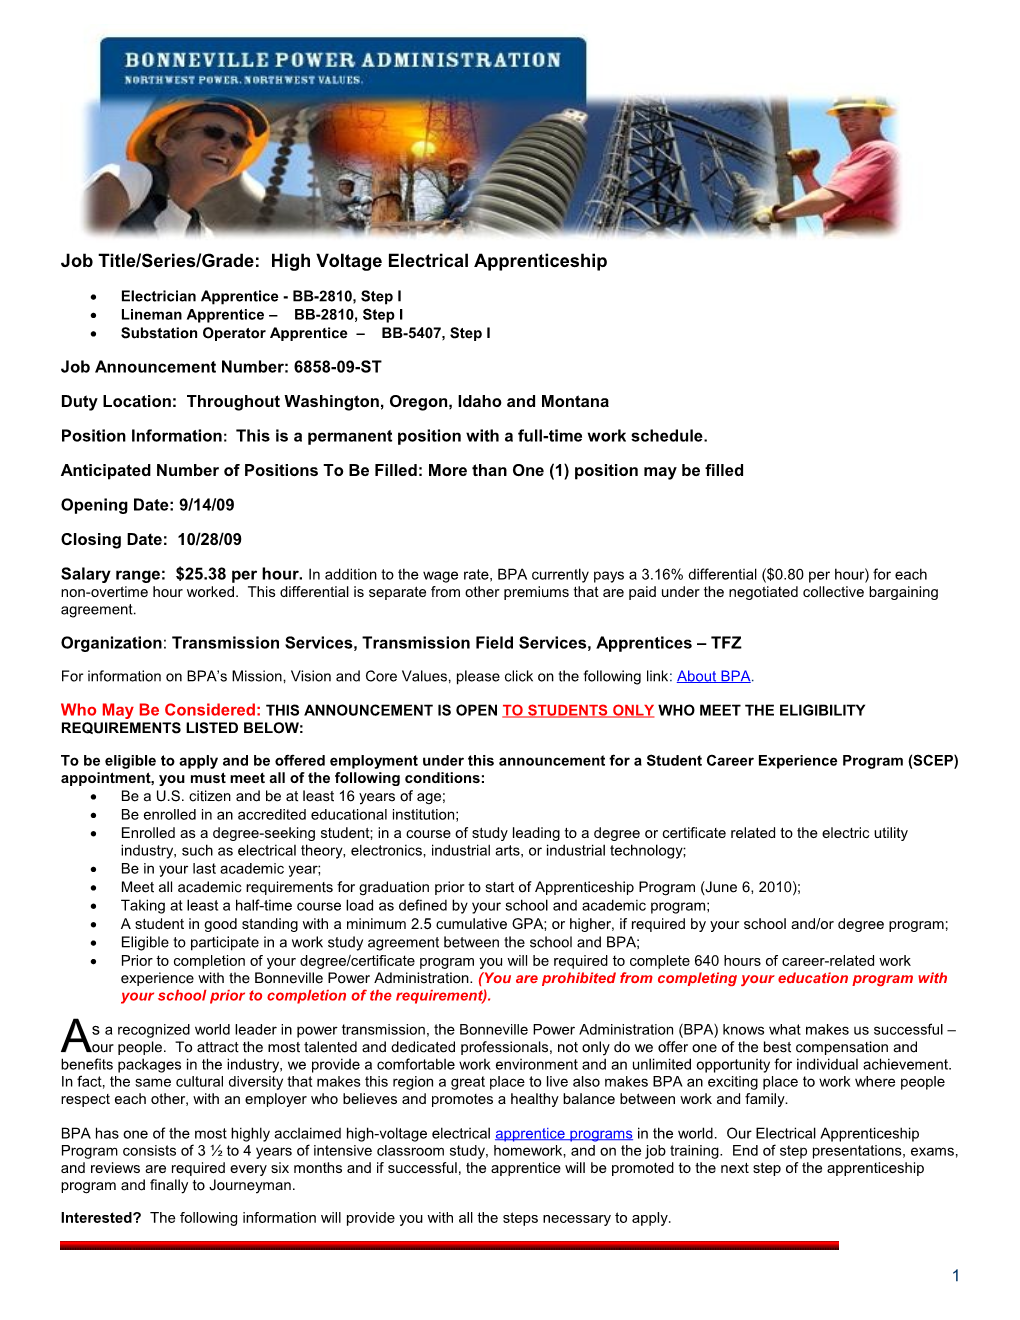 Apprenticeship - High Voltage Electrical (Electrician, Lineman, Substation Operator)